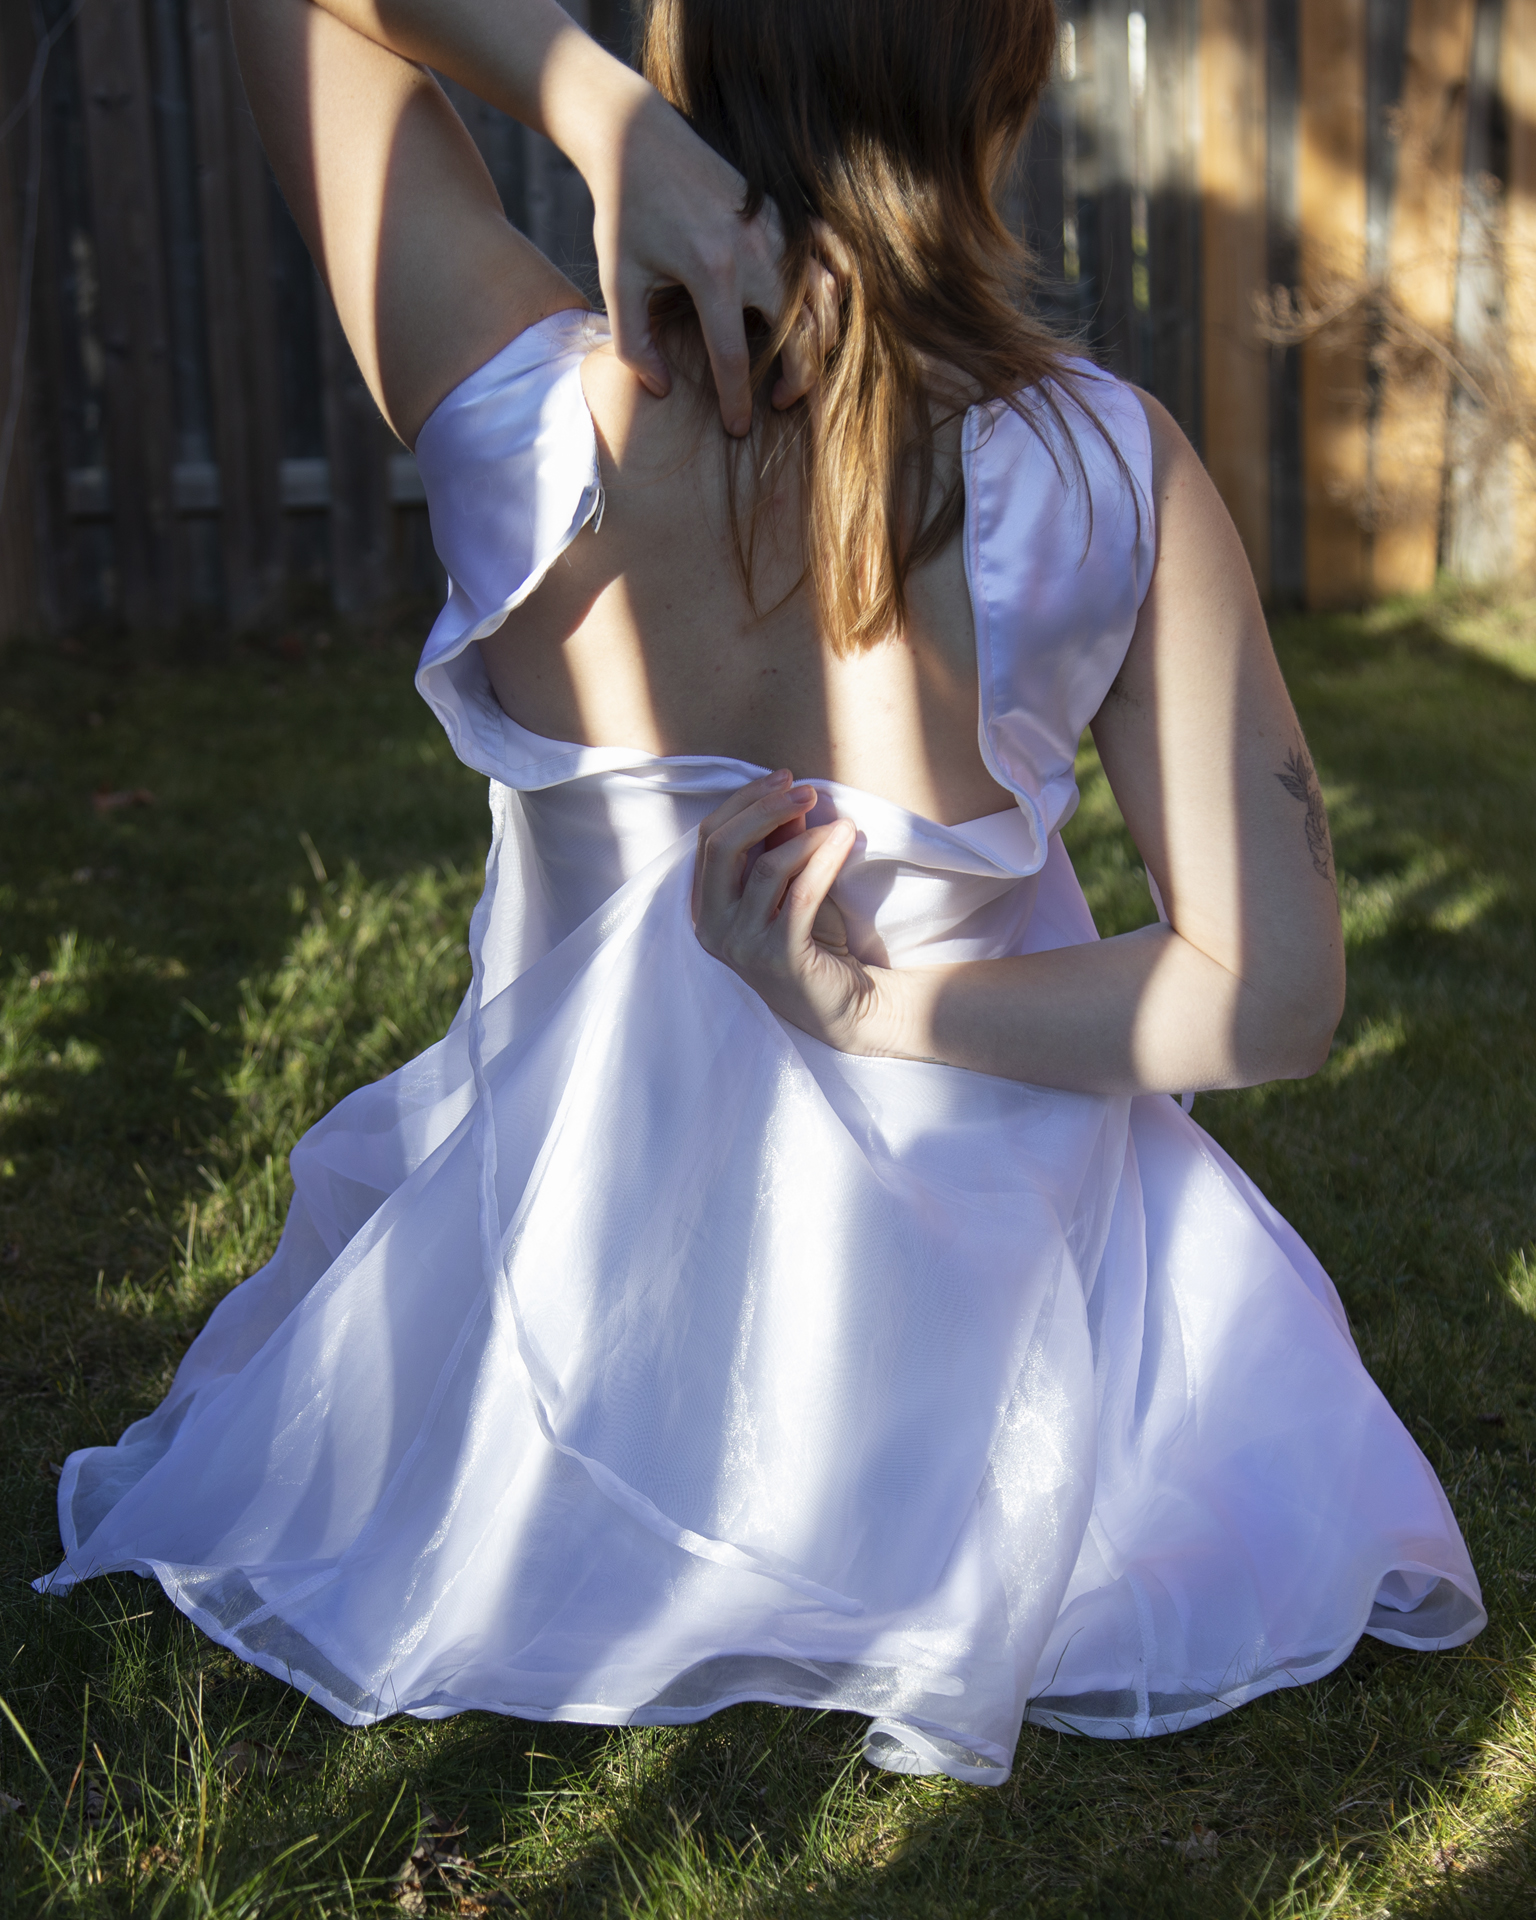 But it just won't fit: A woman kneels on grass while facing away from the camera, she is trying to zip up a white communion dress that is too small for her.